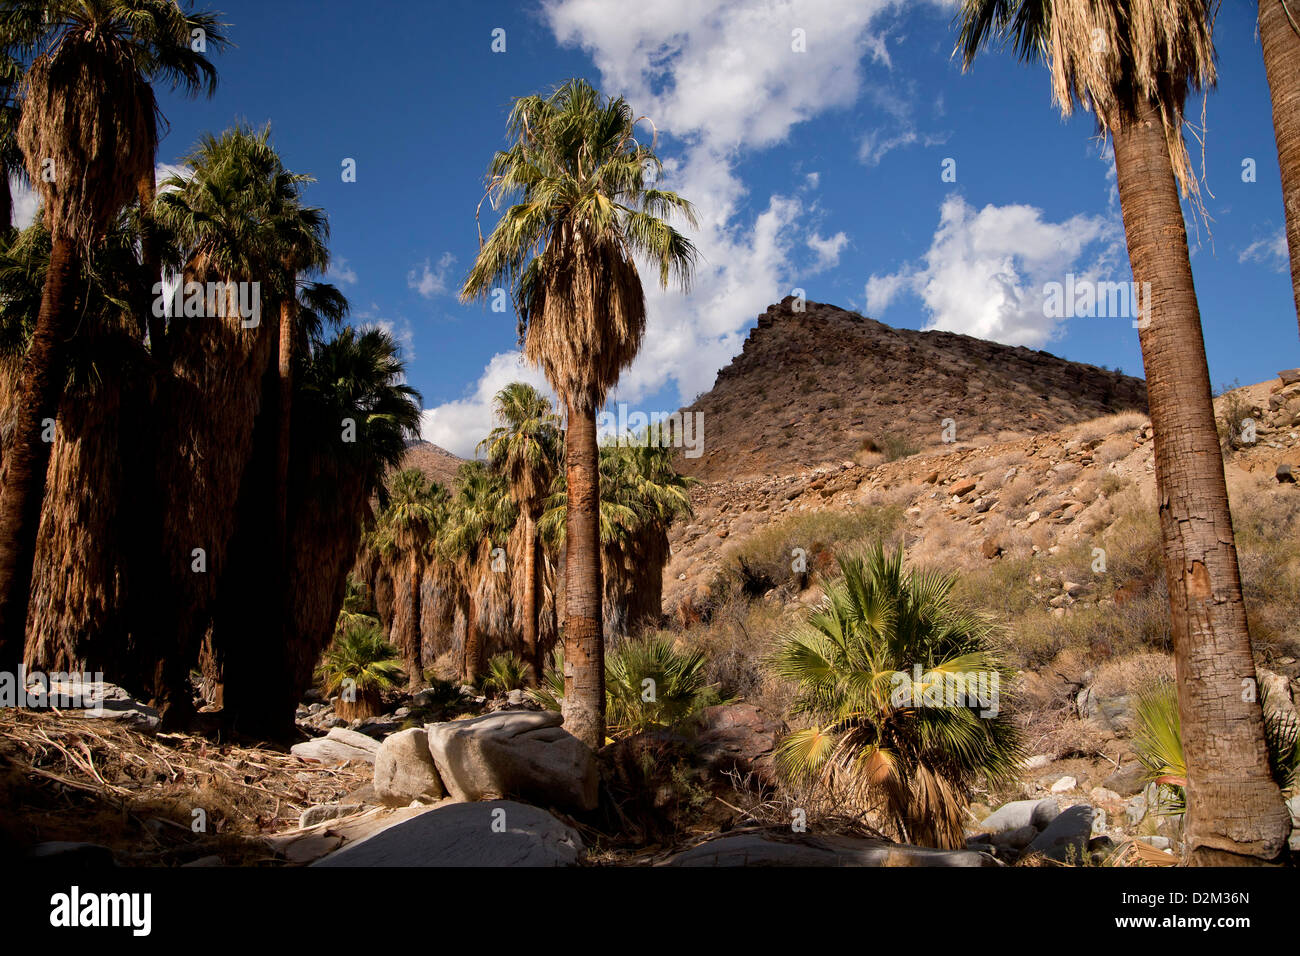 California Fan palm trees at Palm Canyon, Palm Springs, California, United States of America, USA Stock Photo